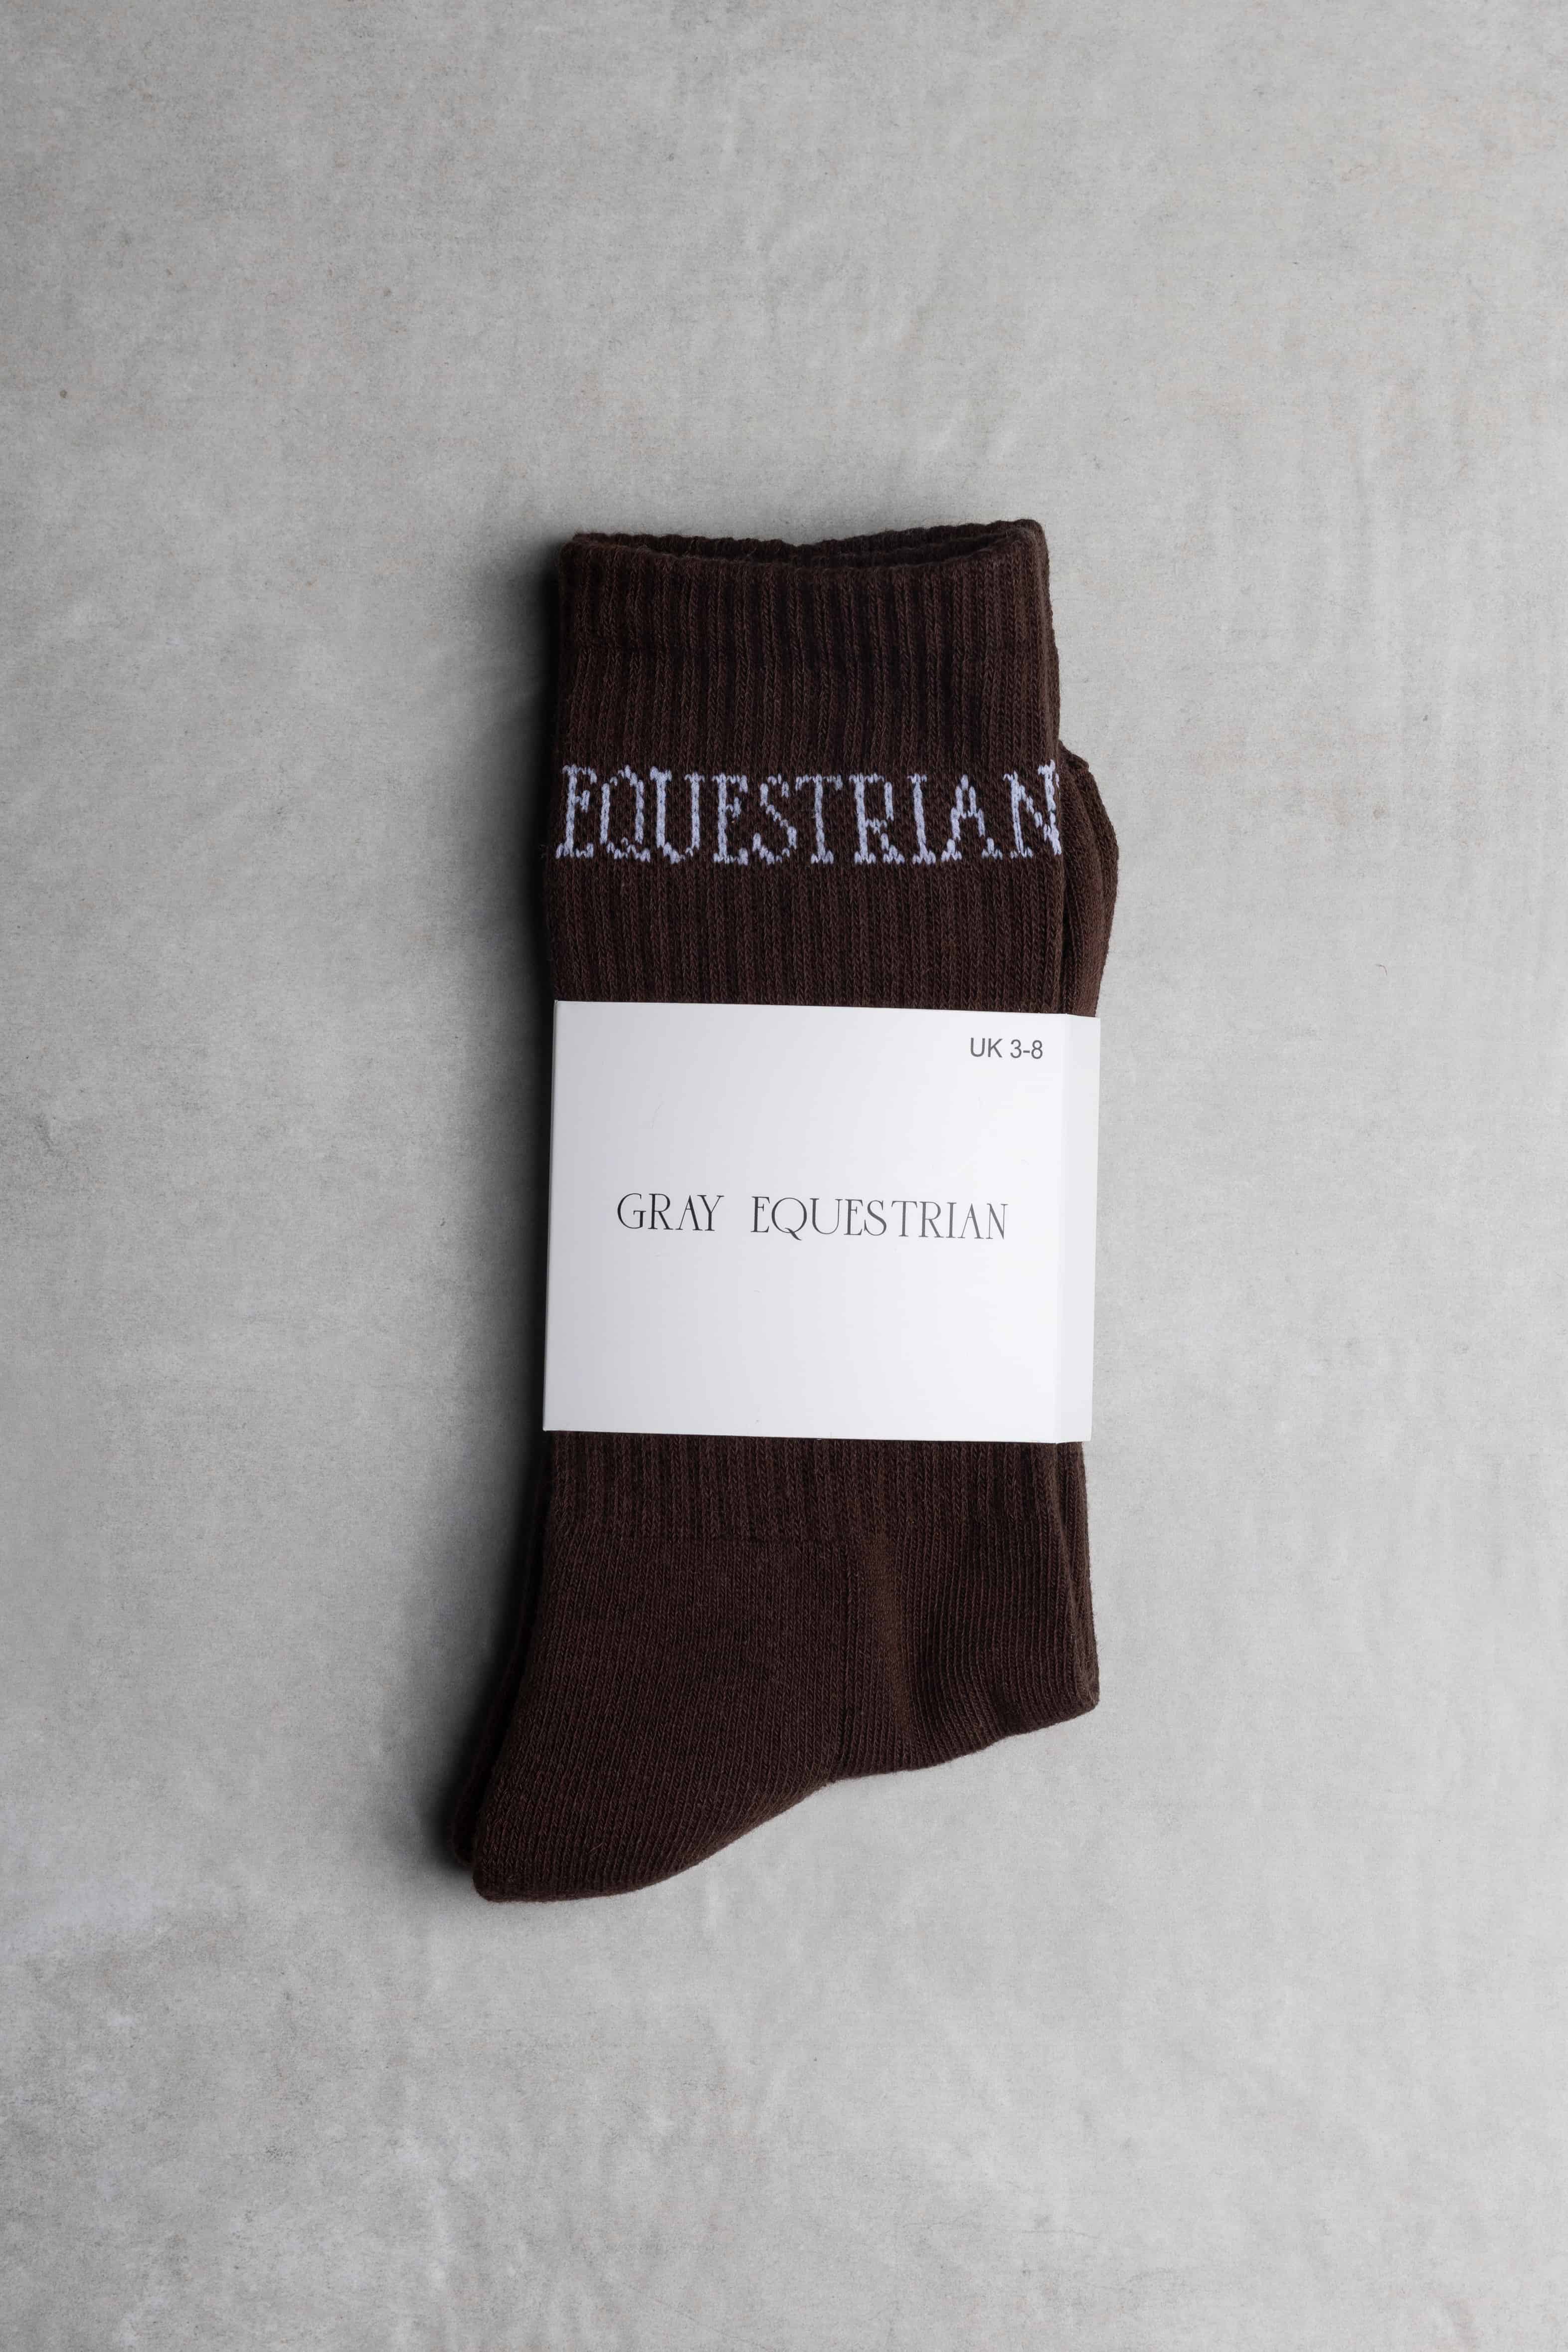 A photo of our brown renew socks.